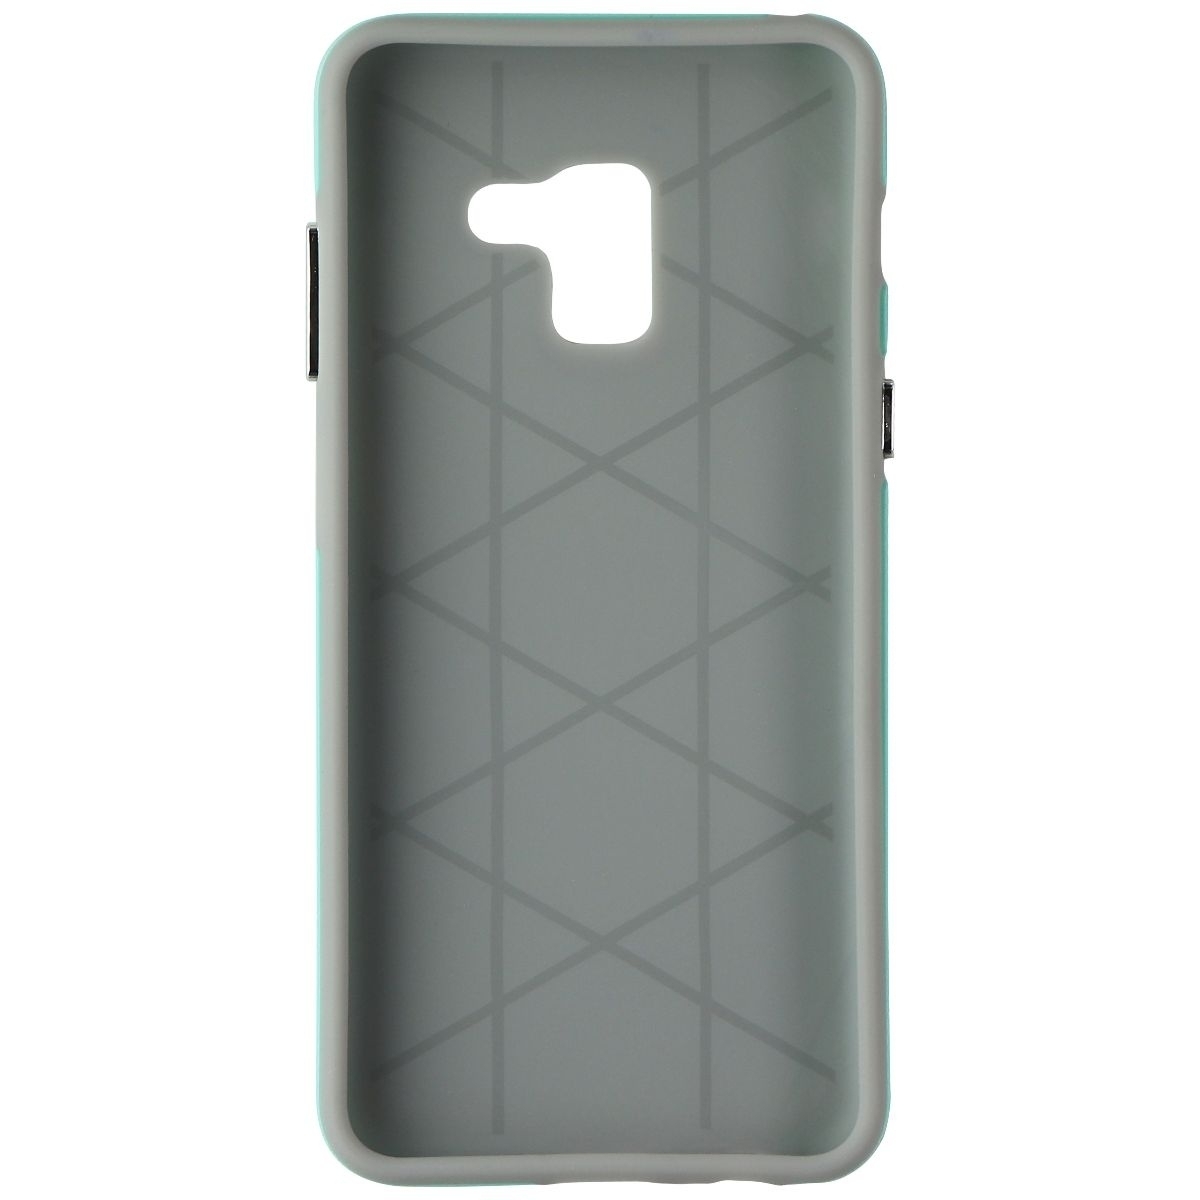 Xqisit Protective Cover For Samsung Galaxy A8 (2018) Smartphone - Teal/Gray